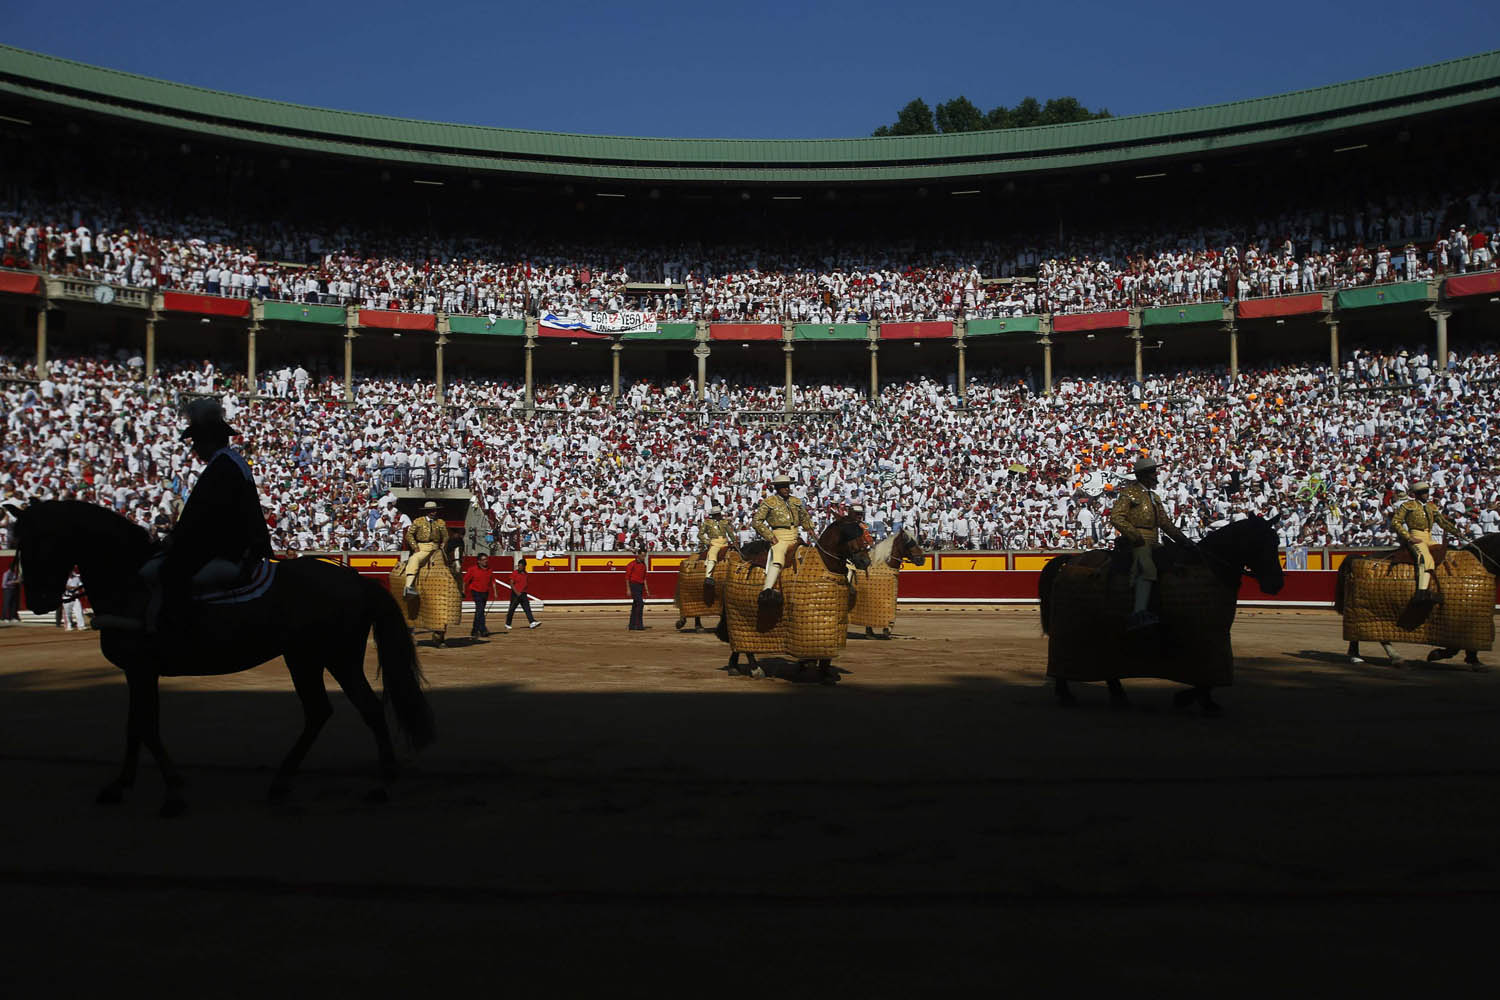 Picadores enter the bull ring at the start of the fifth bullfight of the San Fermin festival in Pamplona